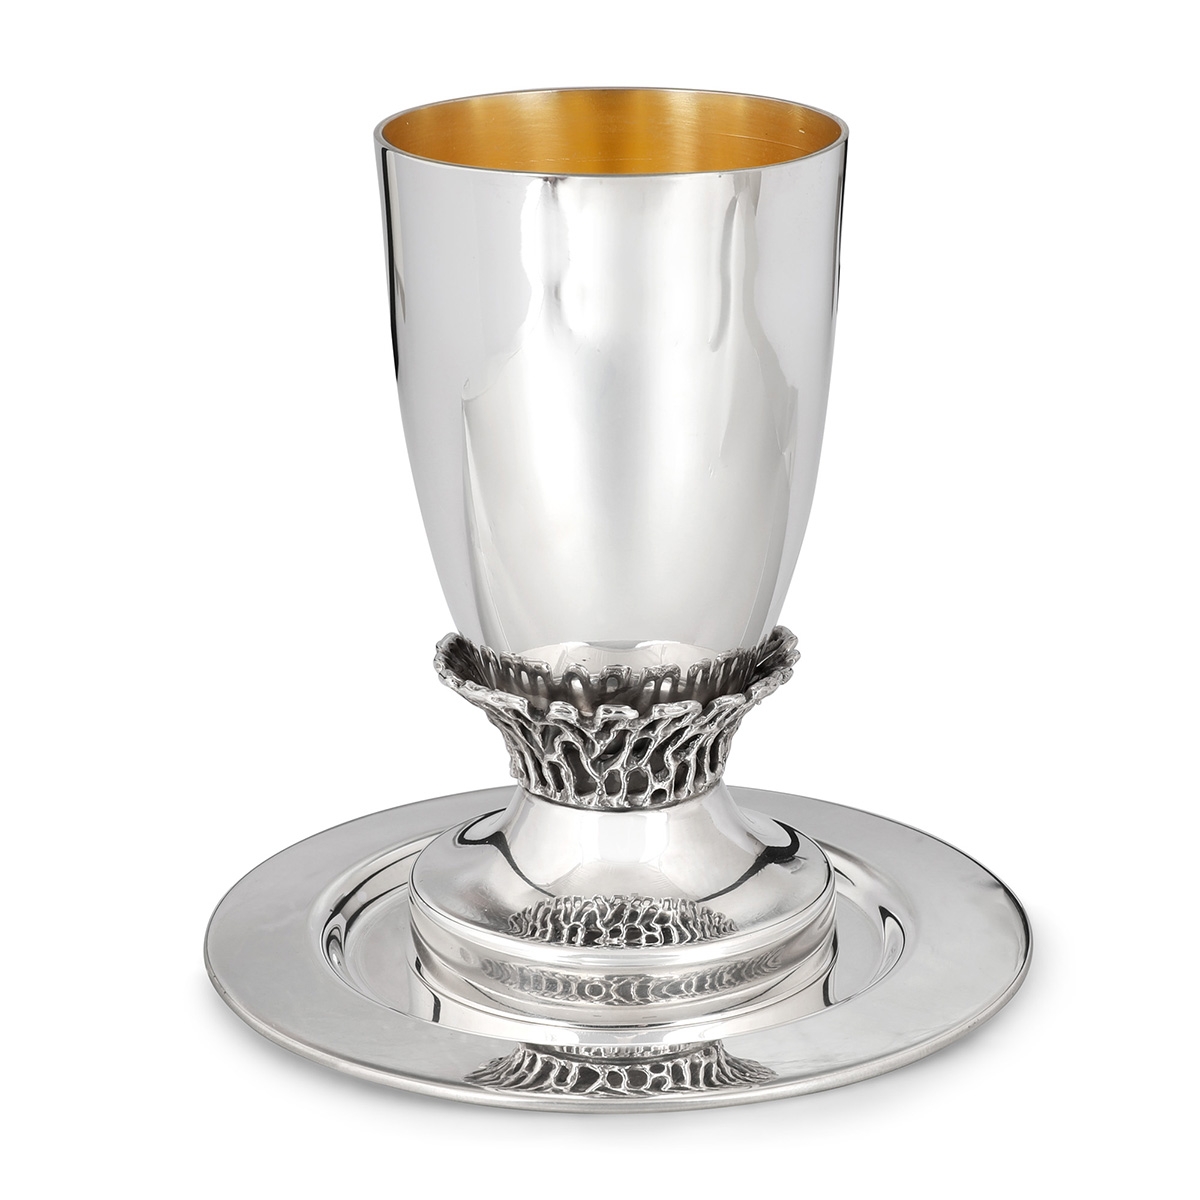 Bier Judaica Luxurious Handcrafted Sterling Silver Kiddush Cup With Textured Flourish - 1